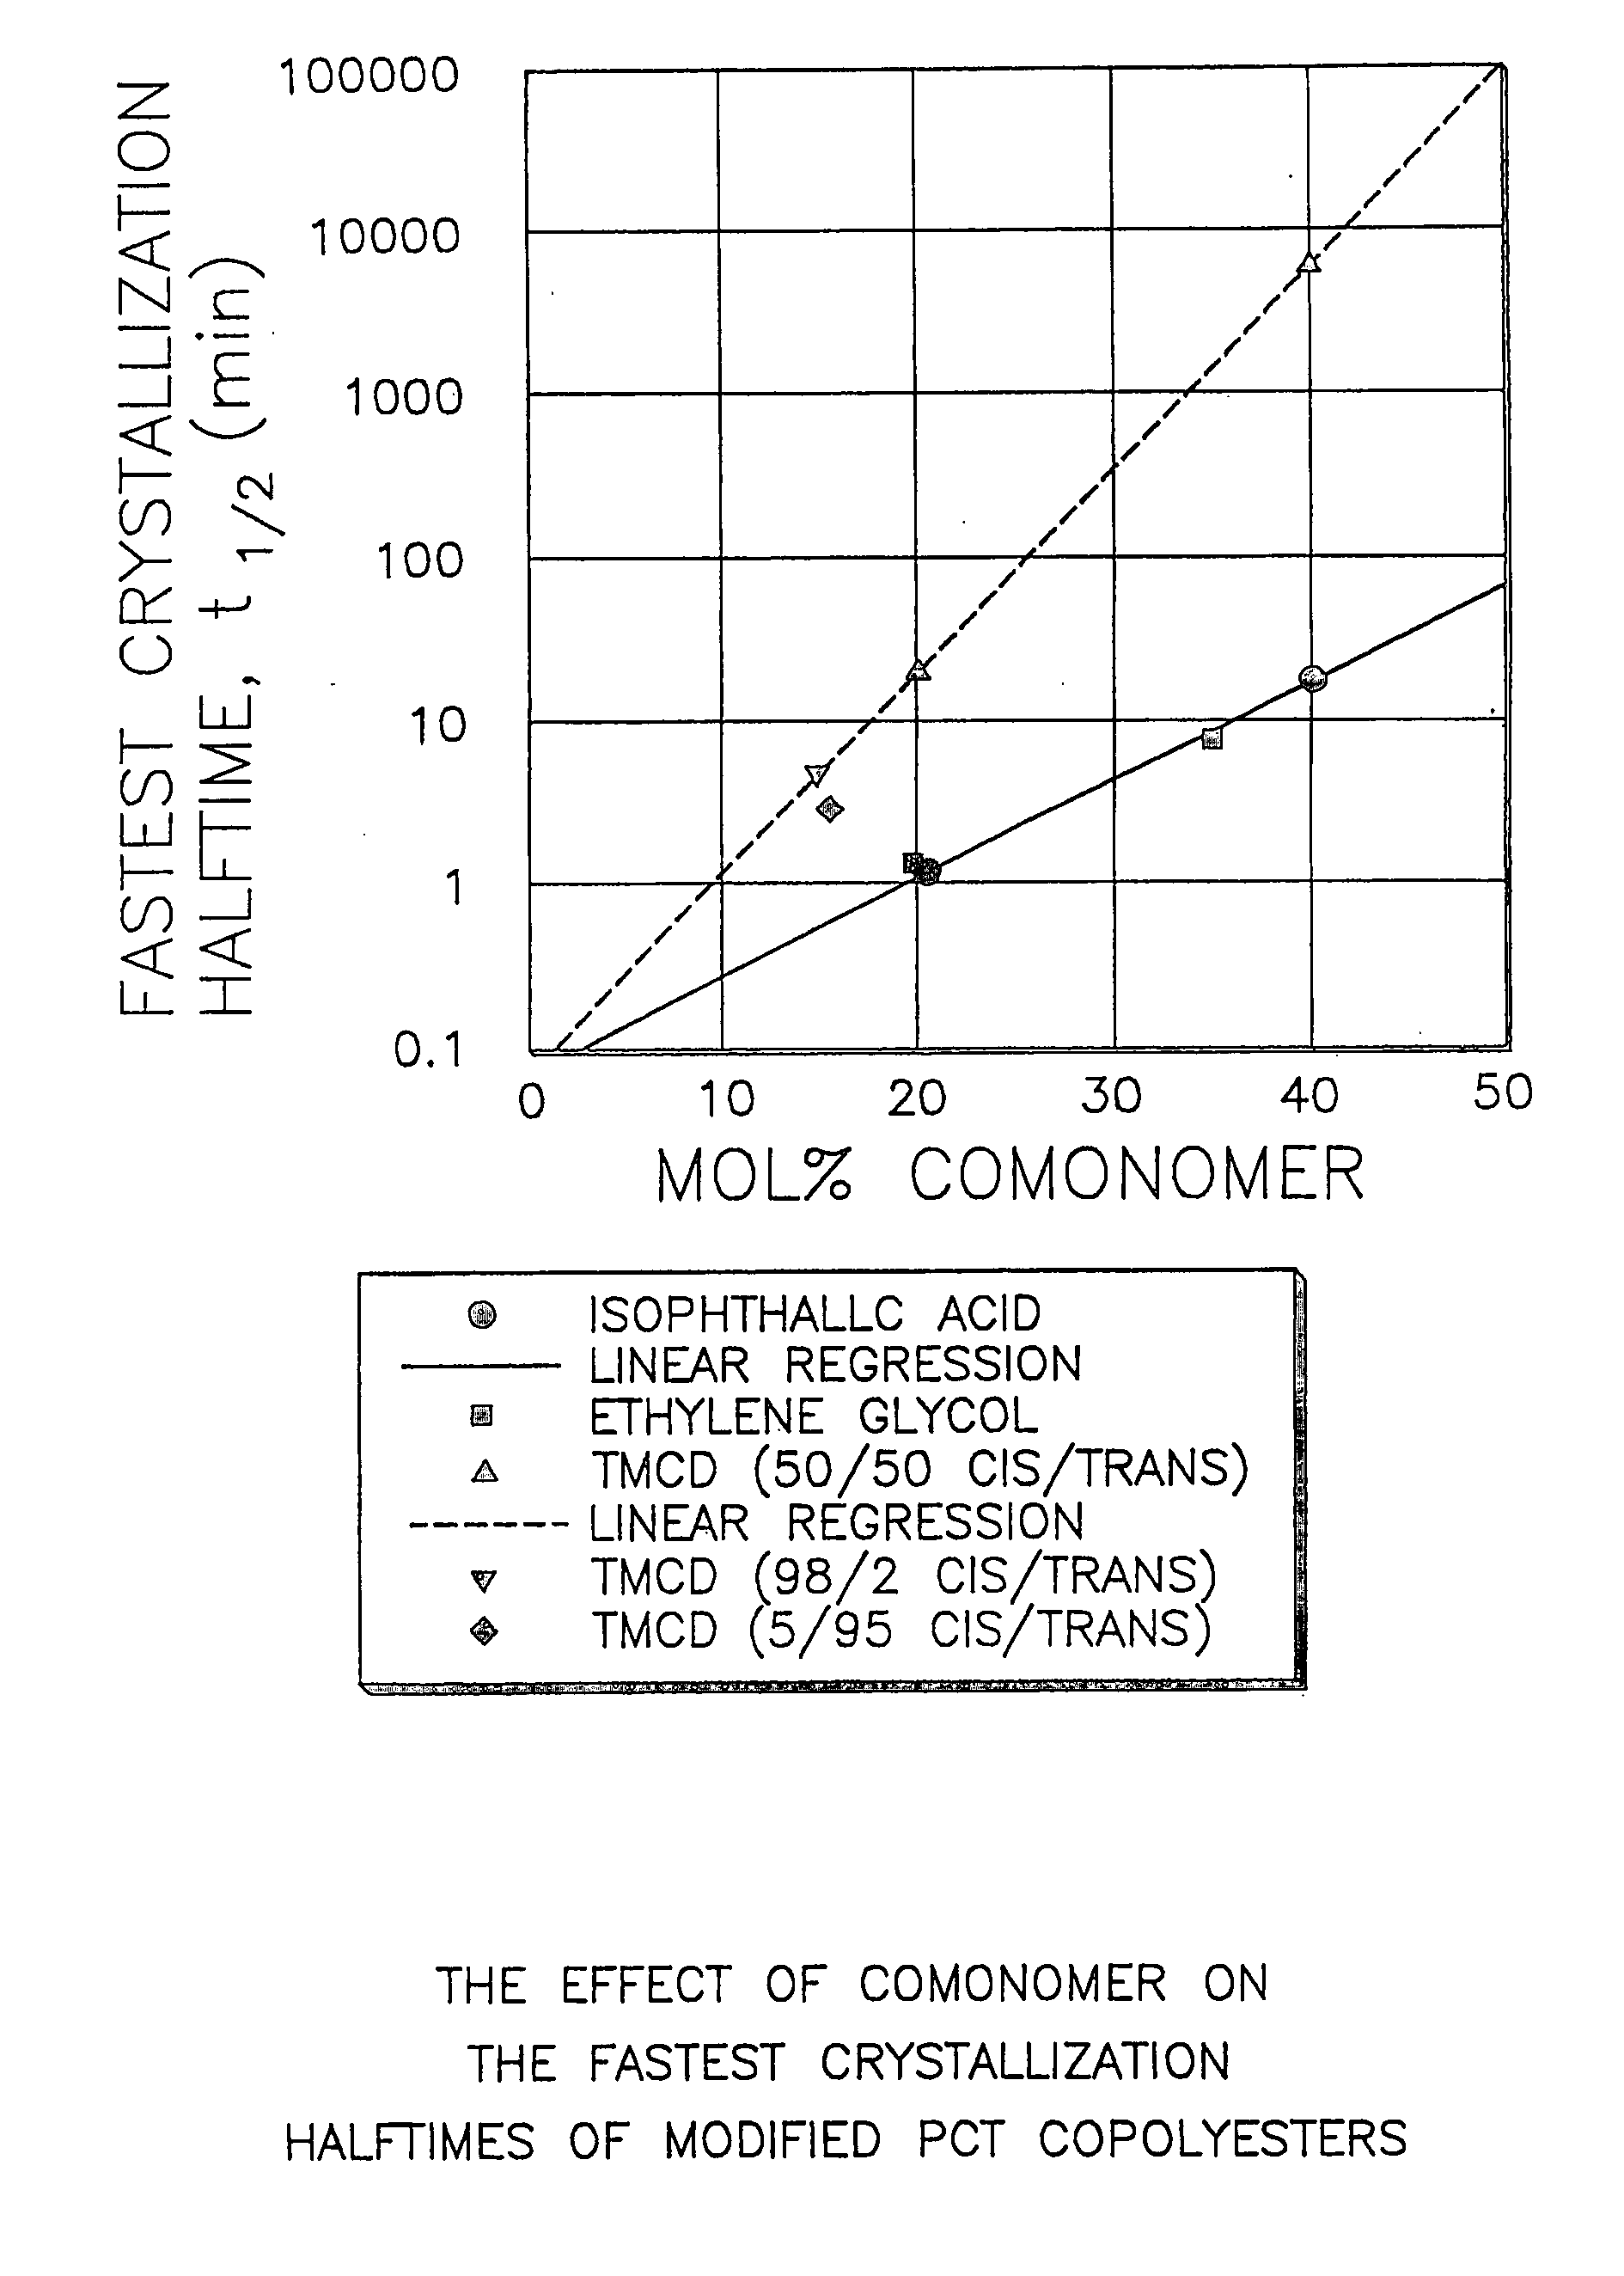 Blood therapy containers comprising polyester compositions formed from 2,2,4,4-tetramethyl-1,3-cyclobutanediol and 1,4-cyclohexanedimethanol